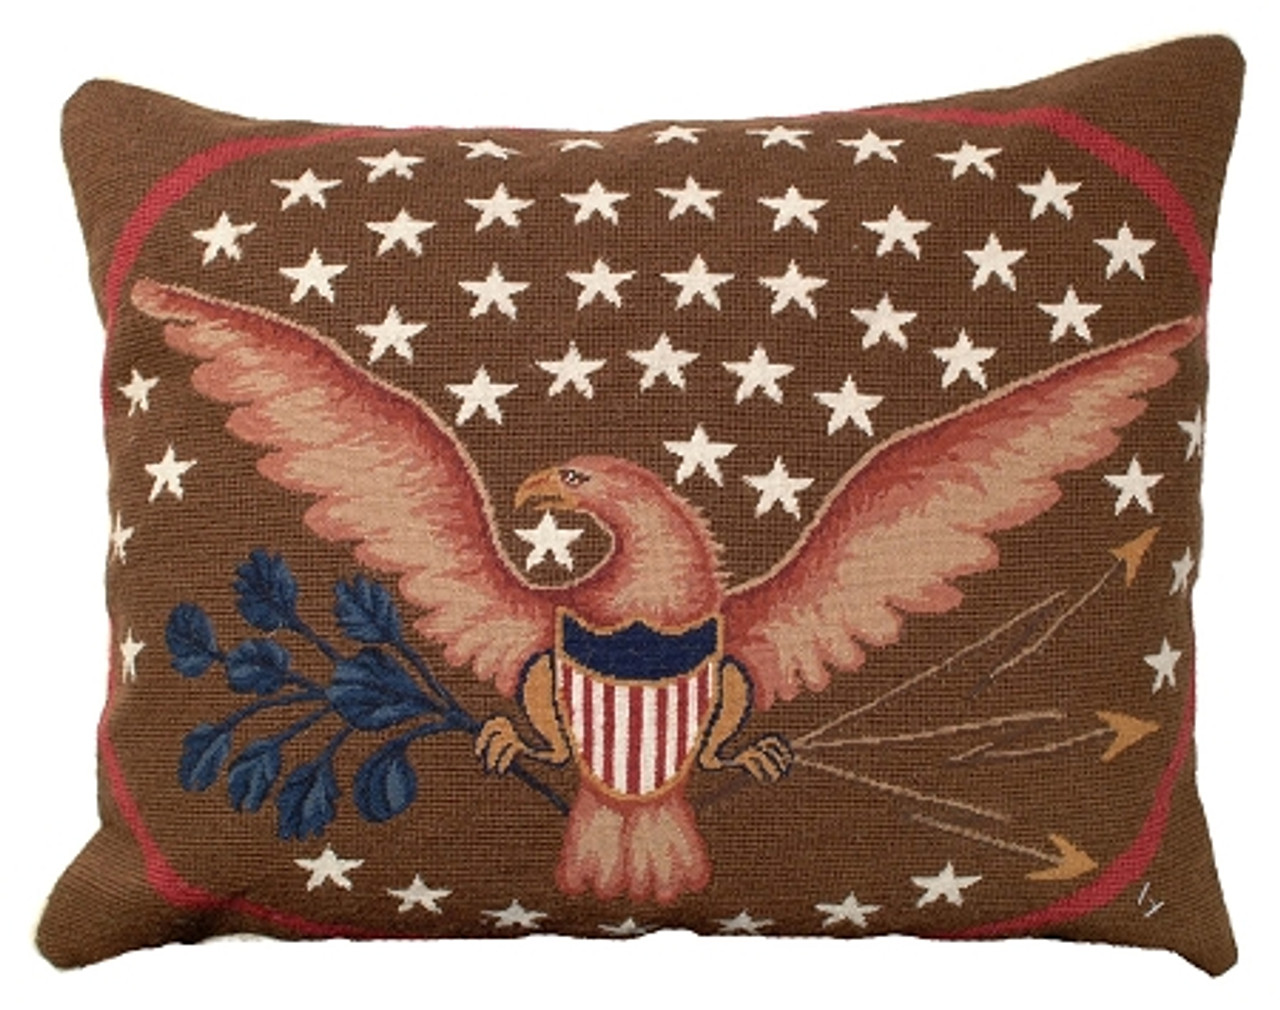 Star and Shield Hooked Pillow